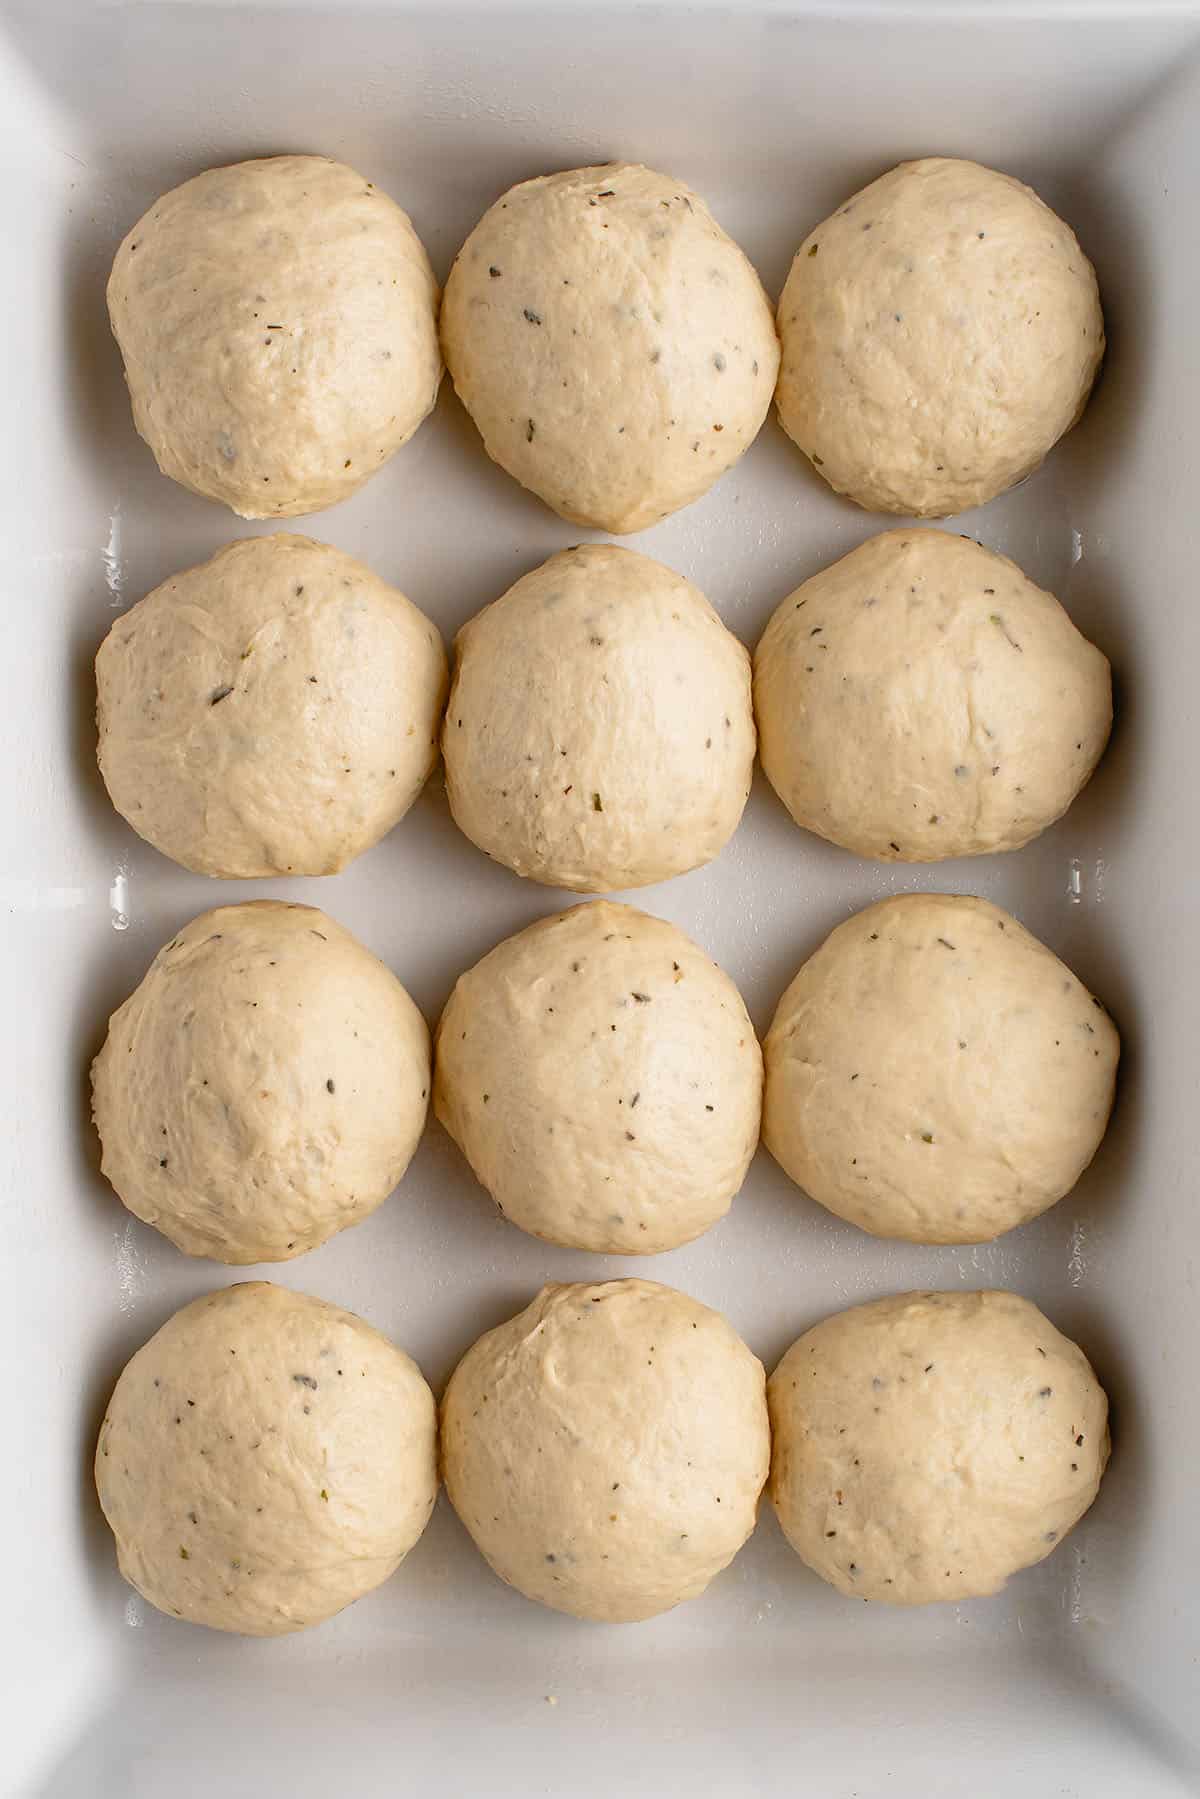 uncooked potato rolls in baking dish before rising